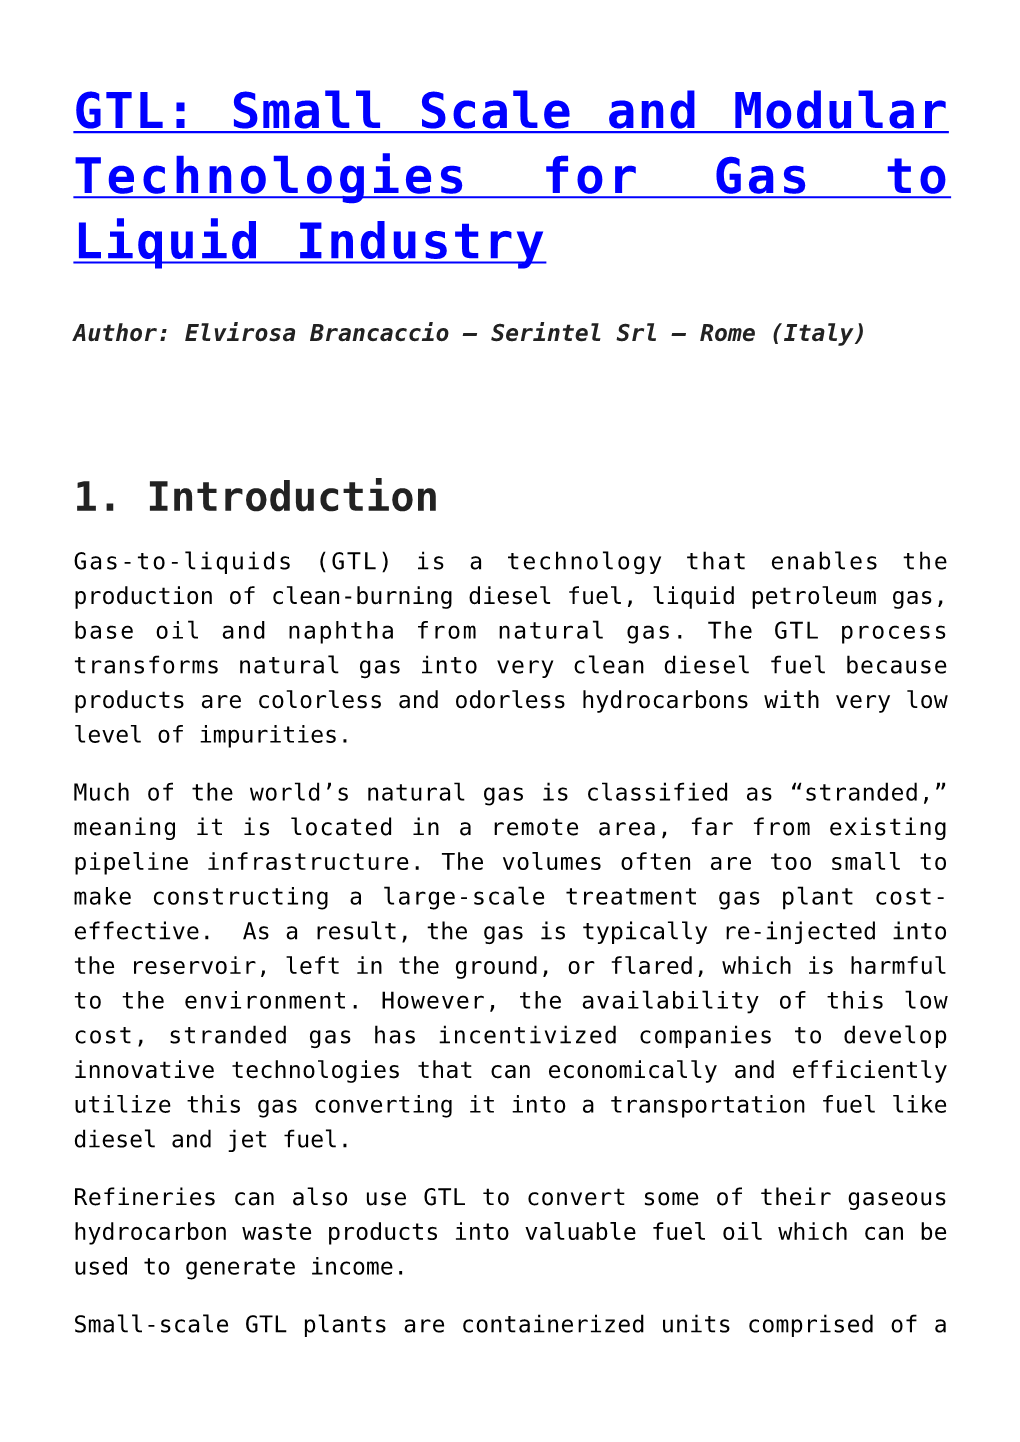 GTL: Small Scale and Modular Technologies for Gas to Liquid Industry